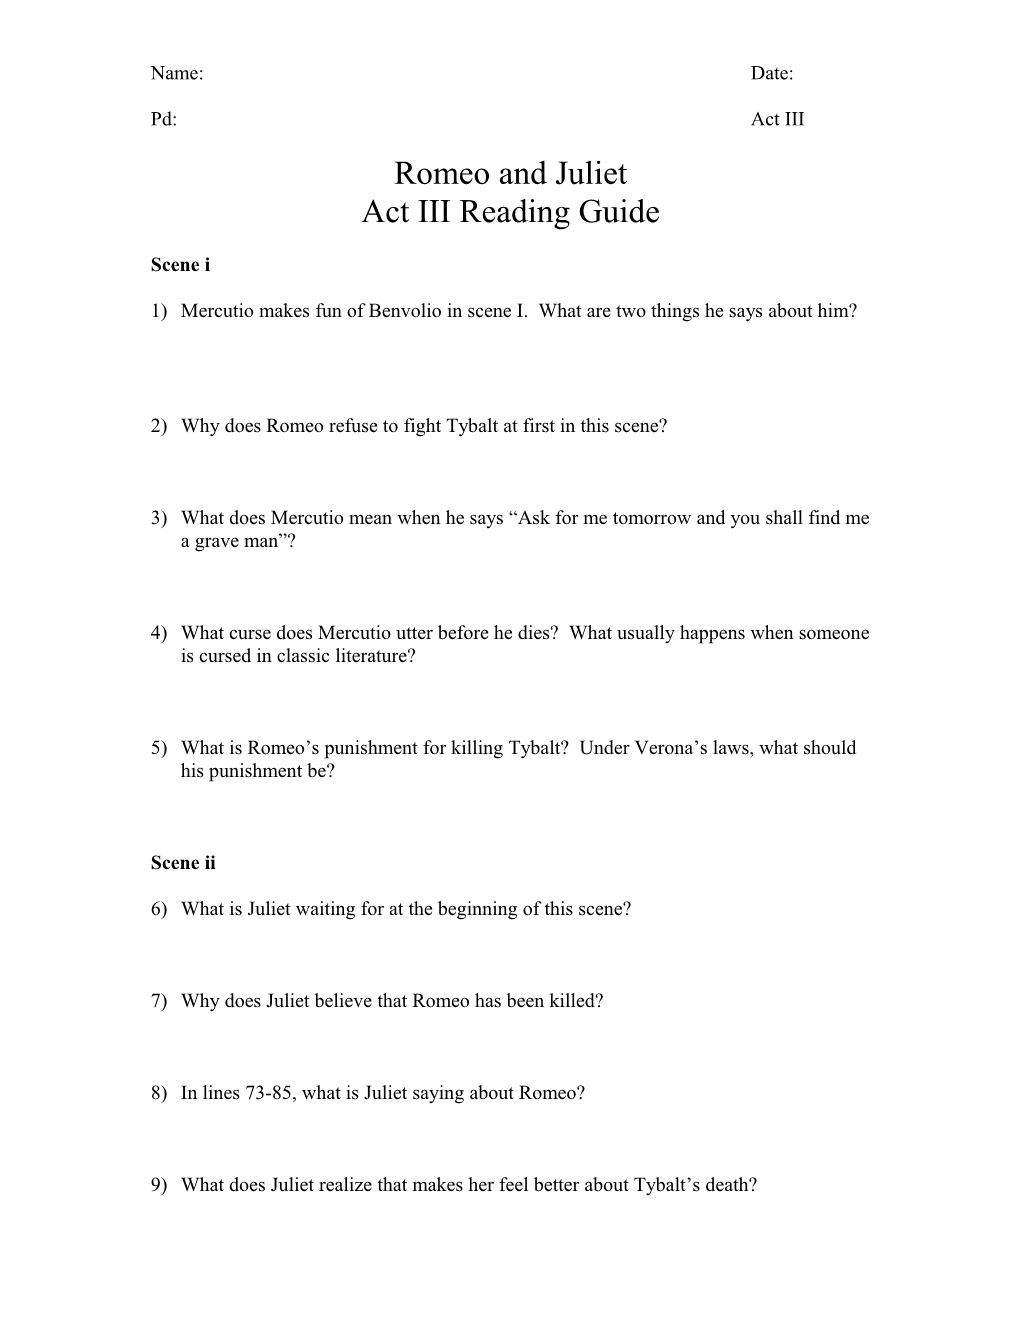 Act III Reading Guide